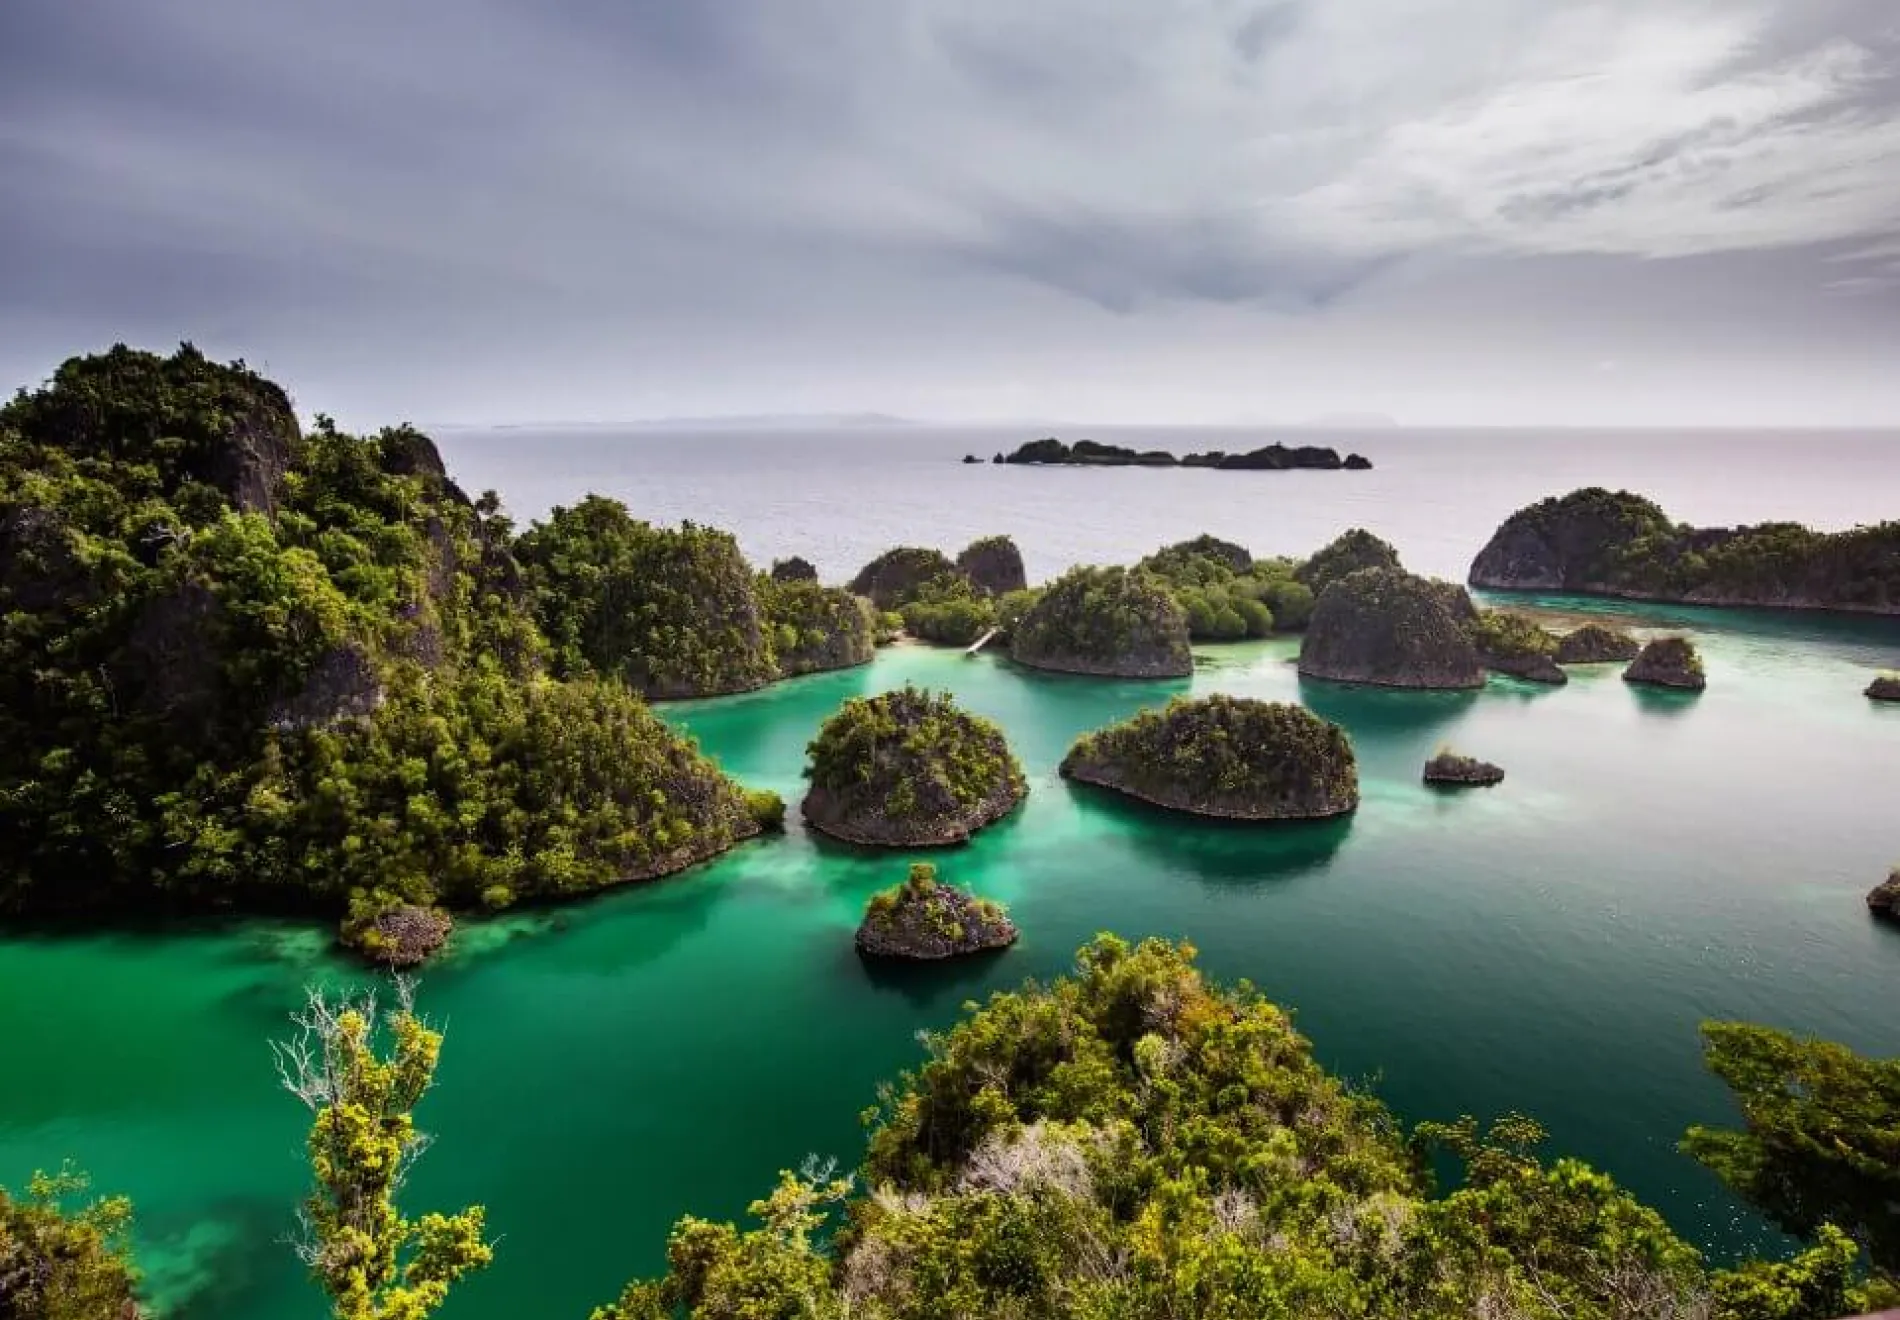 View-to-Piaynemo-islands-from-the-viewpoint-Raja-Ampat-Indonesia